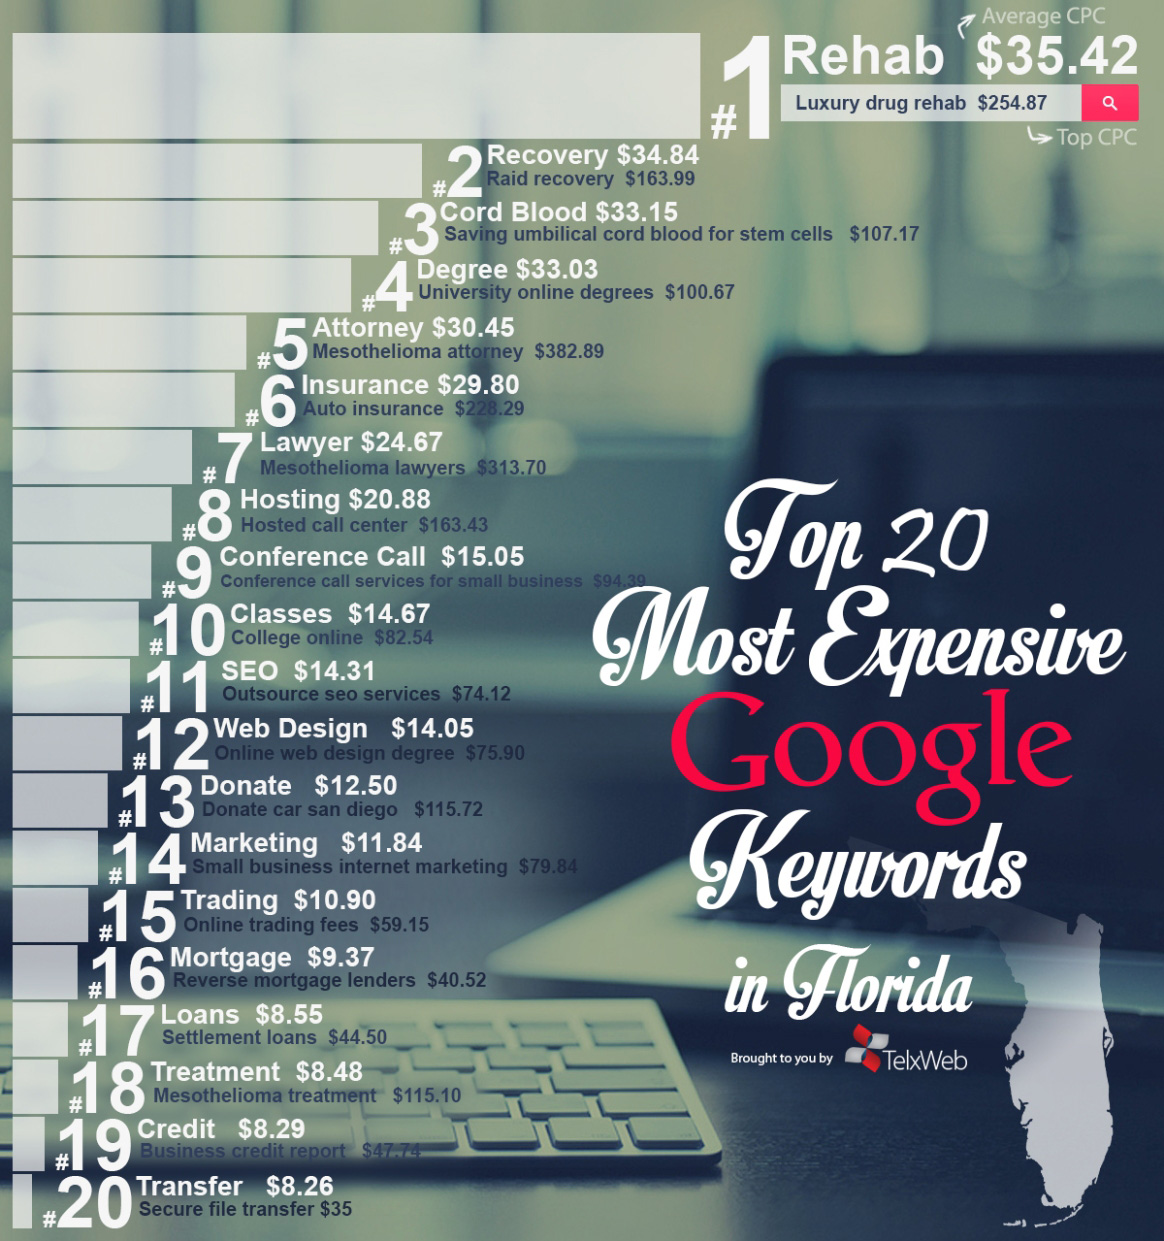 Most Expensive Keywords Infographic